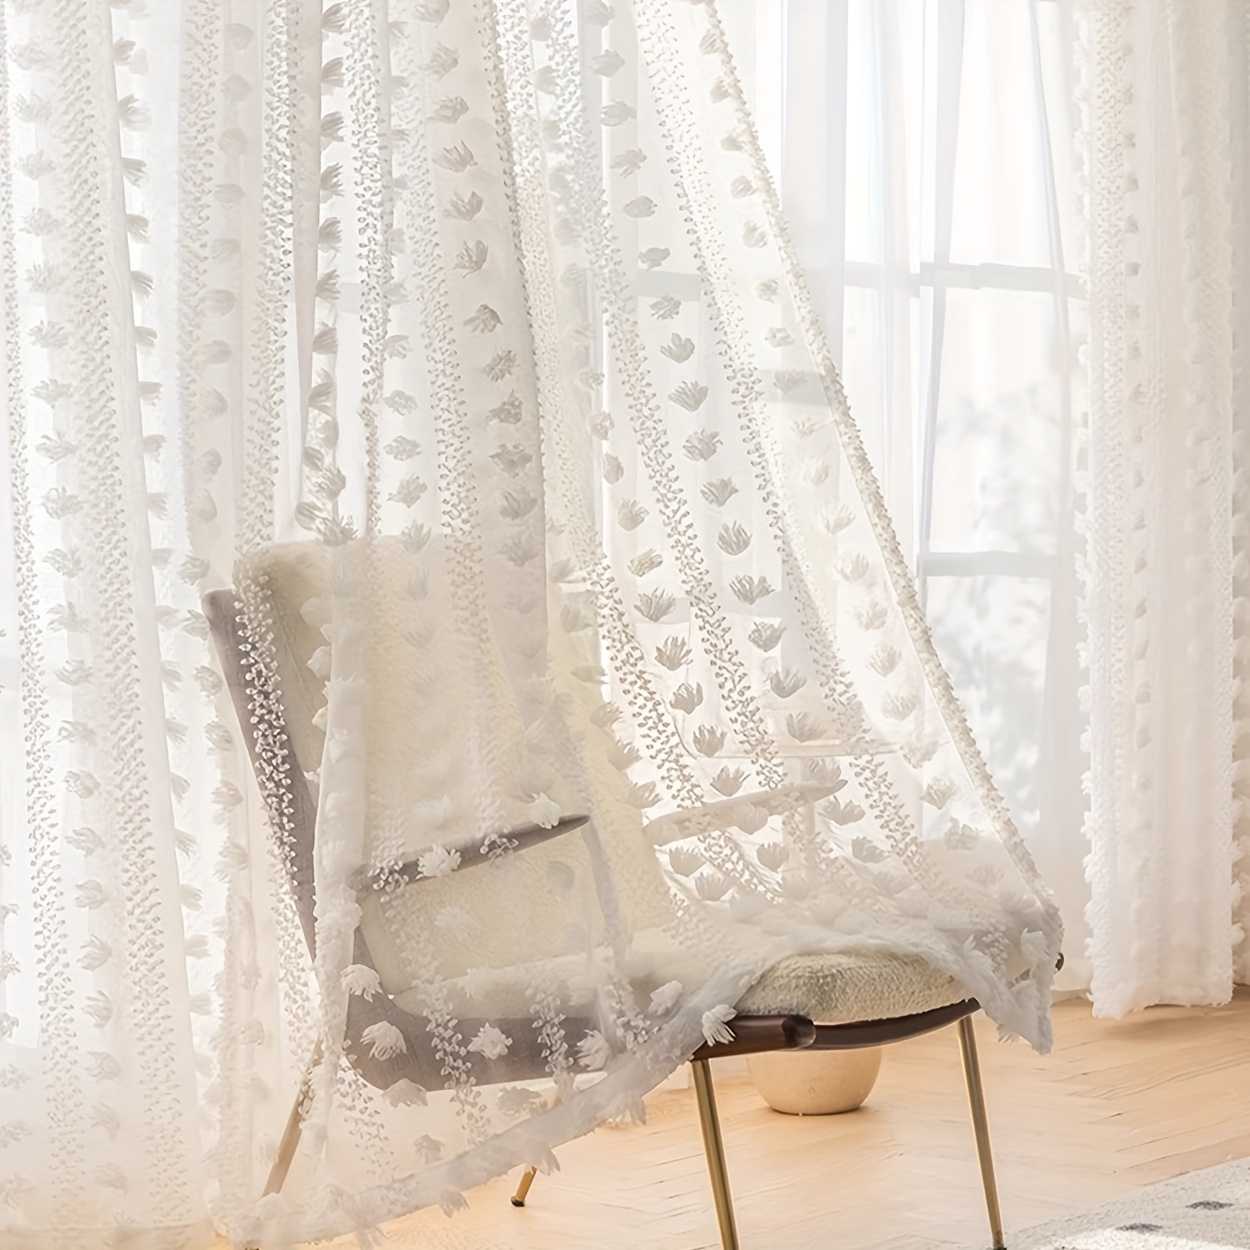 

Chic French Country-style Sheer Curtain With Pom-poms - Light Filtering, Rod Pocket Design For Living Room & Bedroom Decor